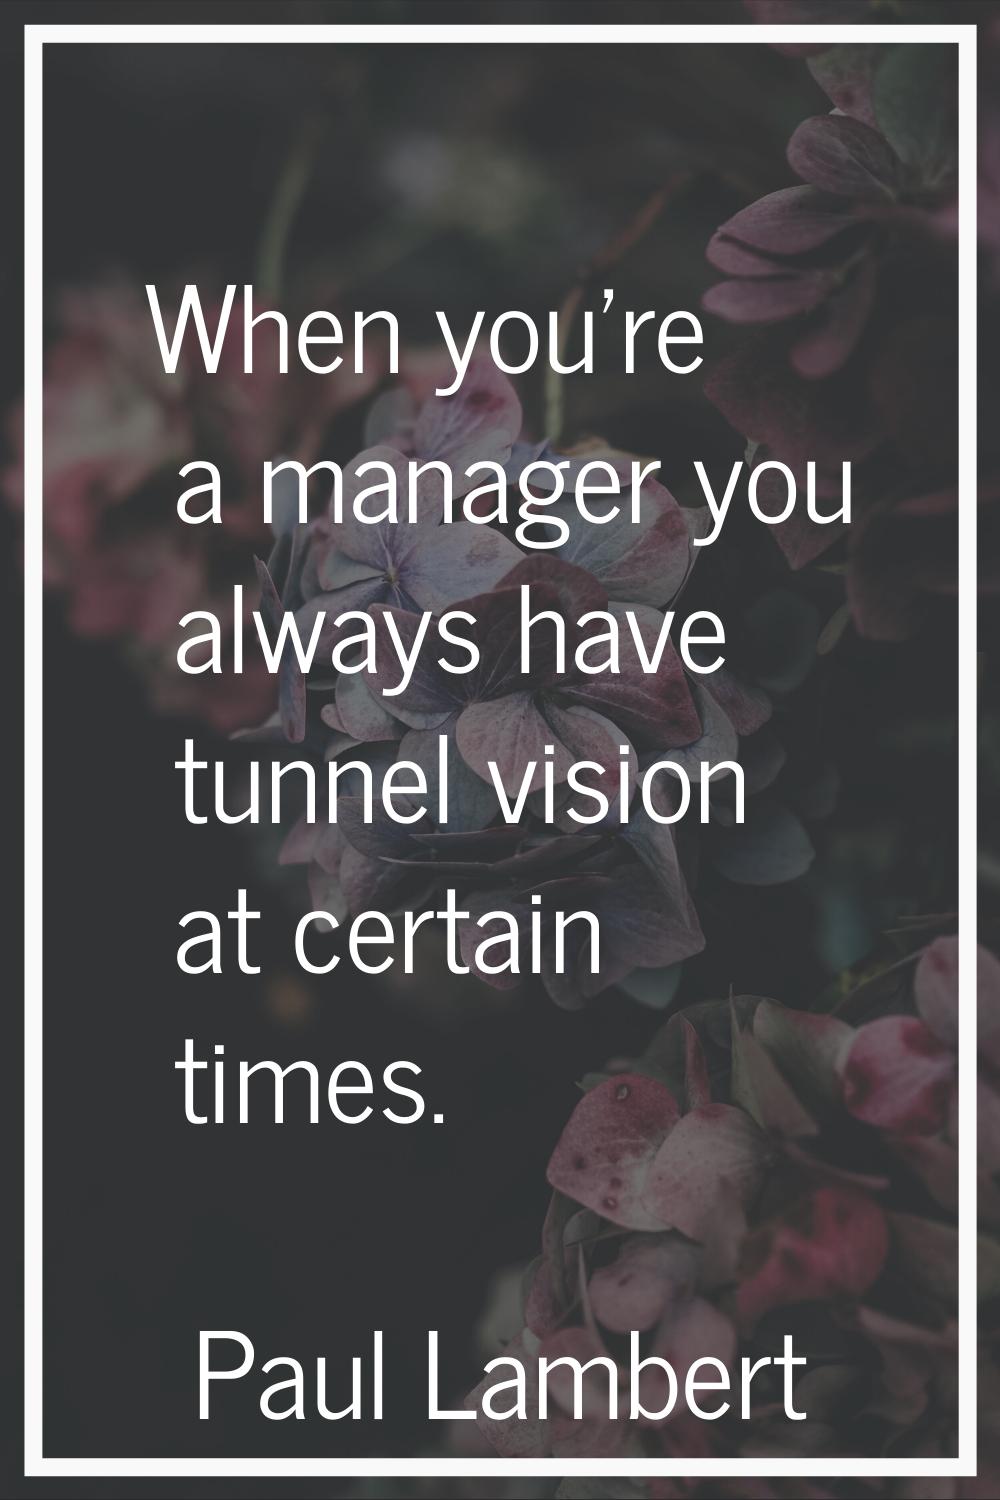 When you're a manager you always have tunnel vision at certain times.